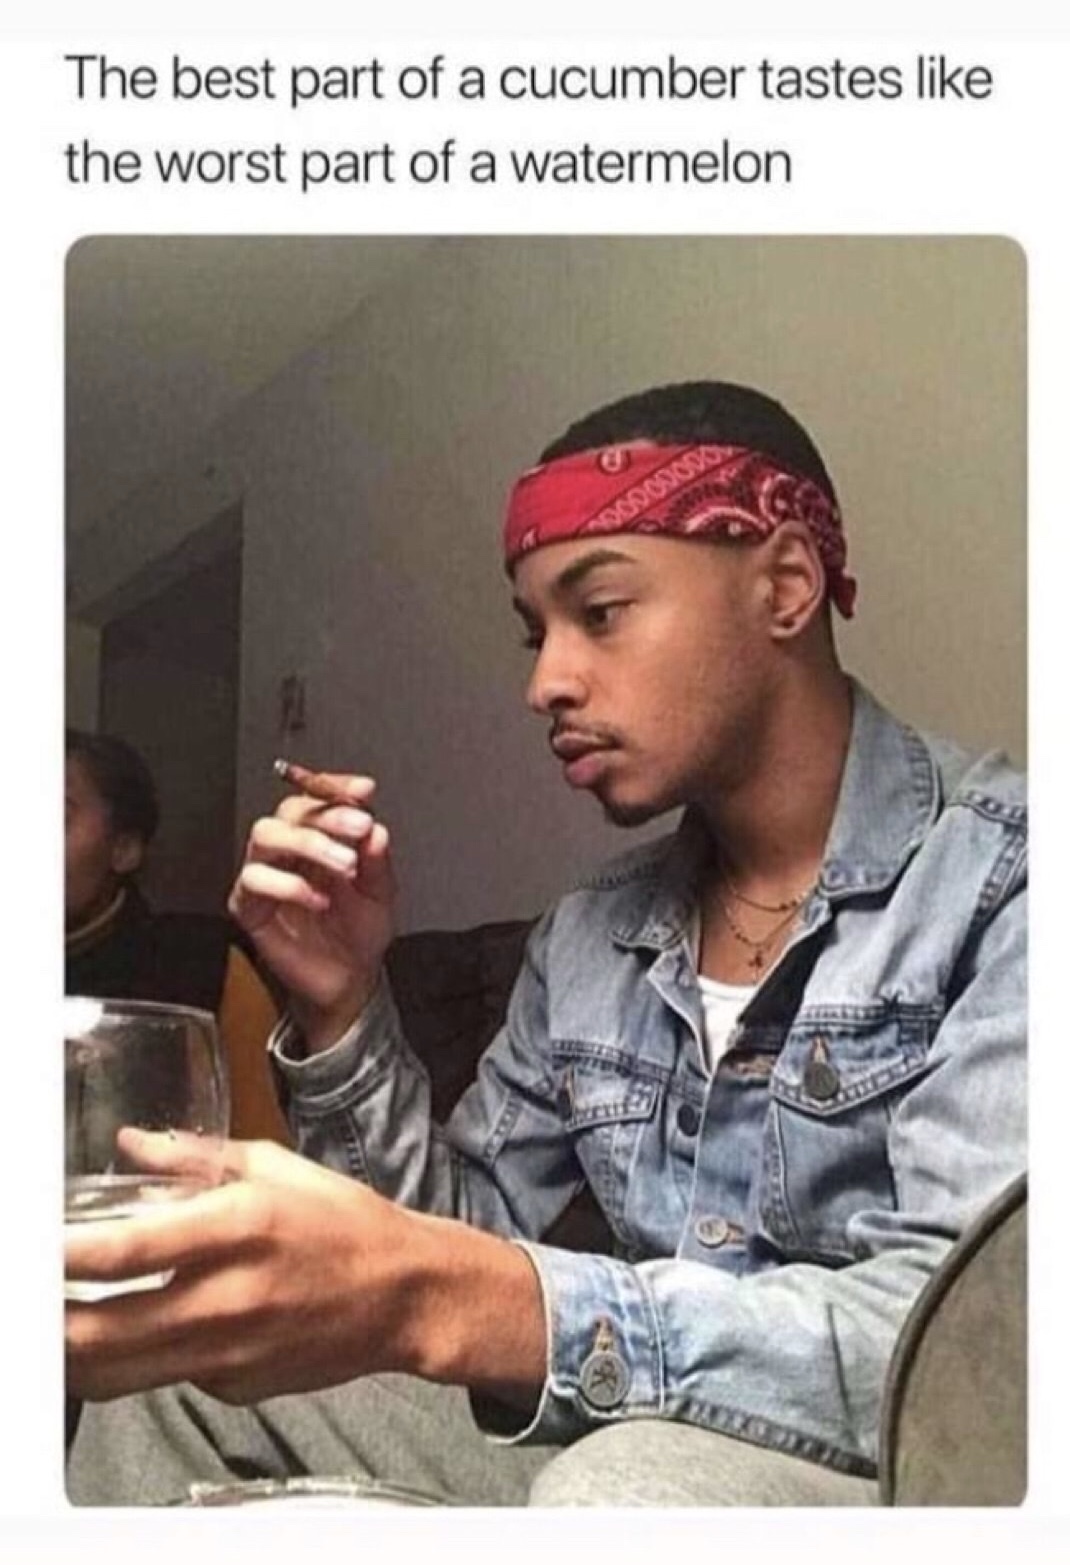 funny meme about cucumbers and watermelons with pic of reflective guy smoking a joint